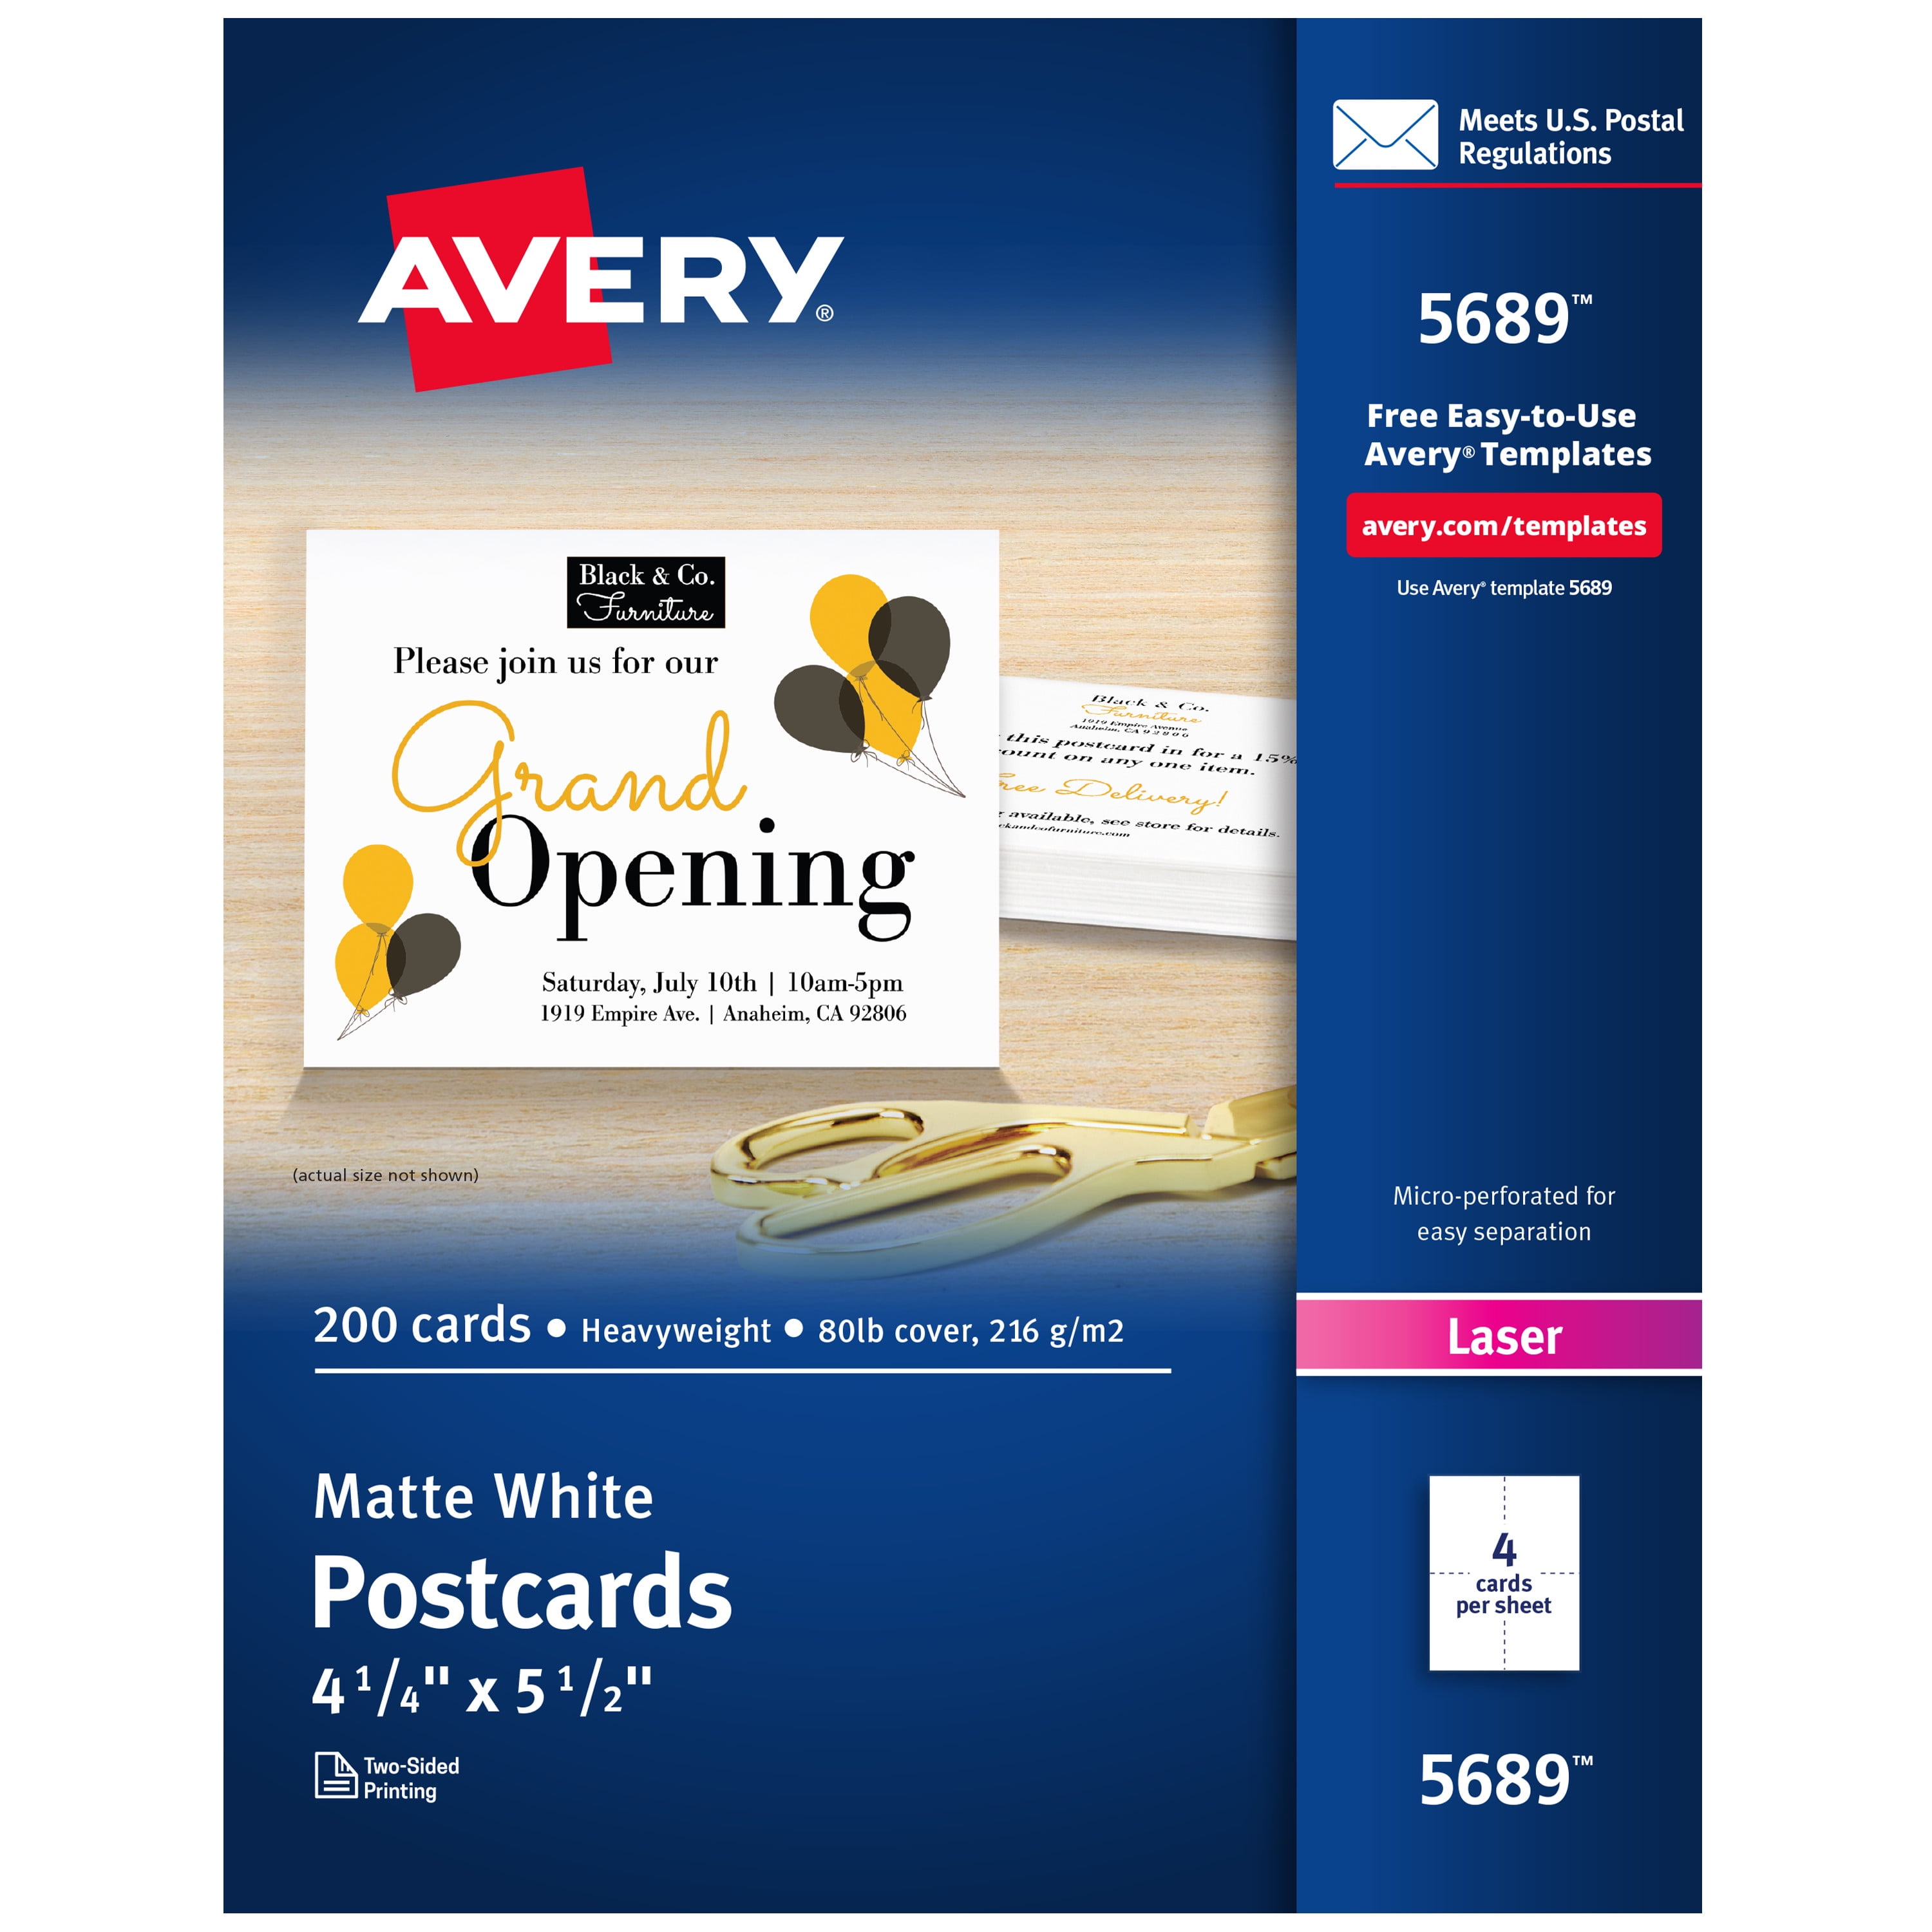 U.S Laser Printers 4.25 x 5.5 Avery Printable Cards 5689 200 Cards Post Card Size - 2 Pack 